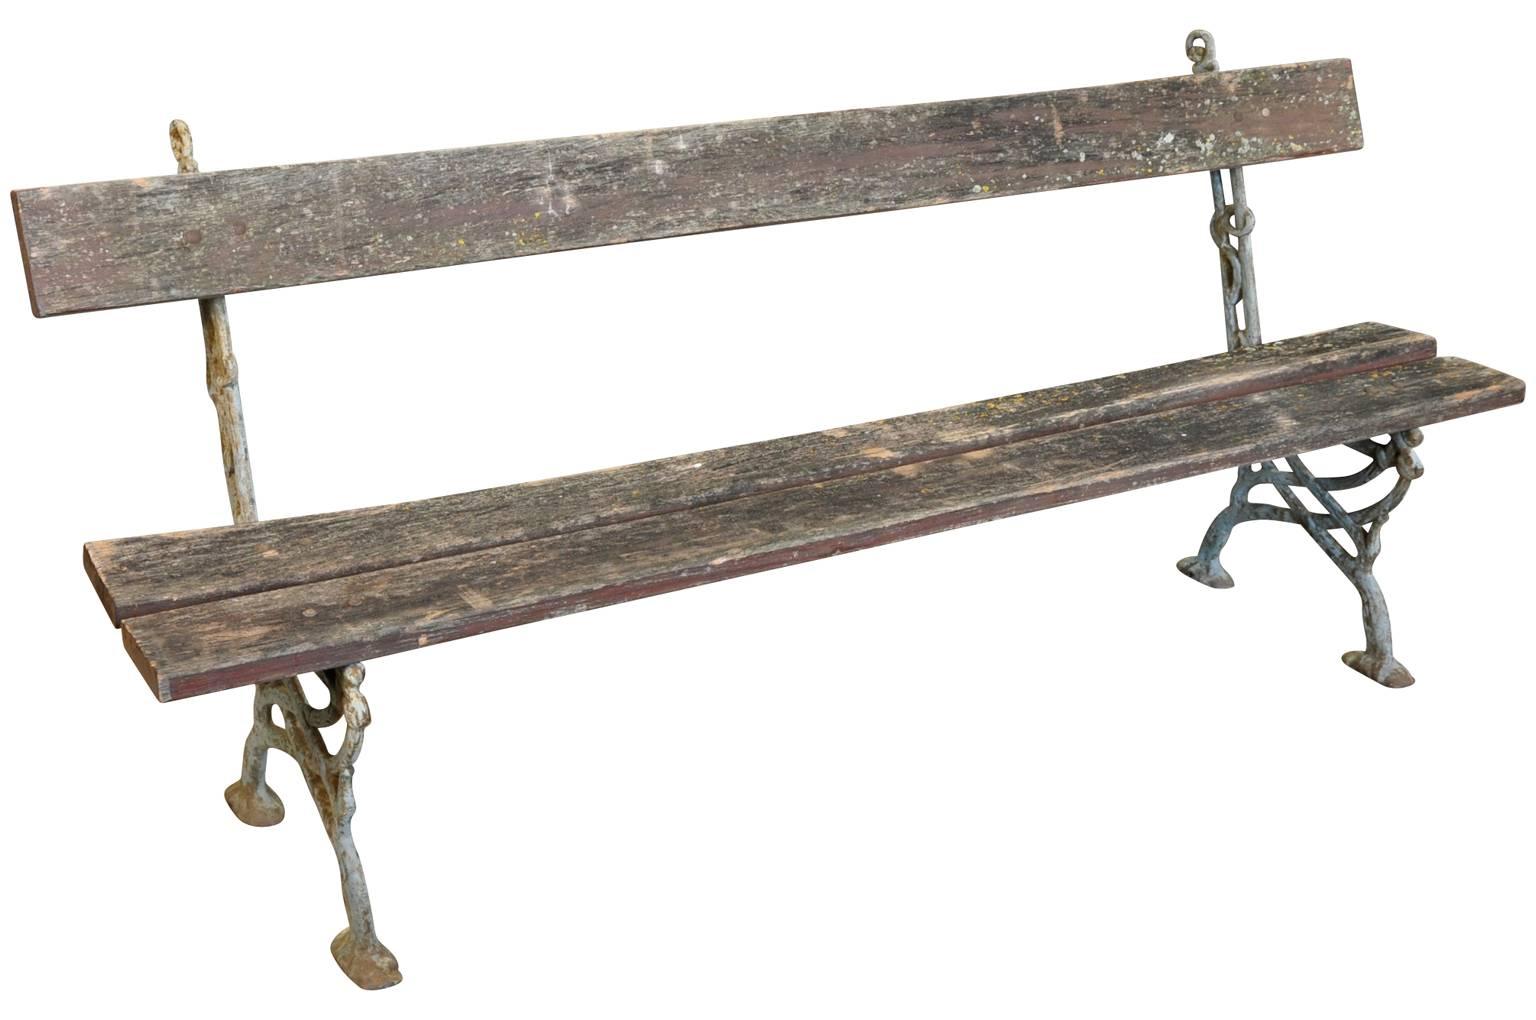 A delightful pair of late 19th century garden benches from the South of France. Soundly constructed from cast iron and oak. Fabulous patina. The benches may be sold separately. The price per bench is $2438.